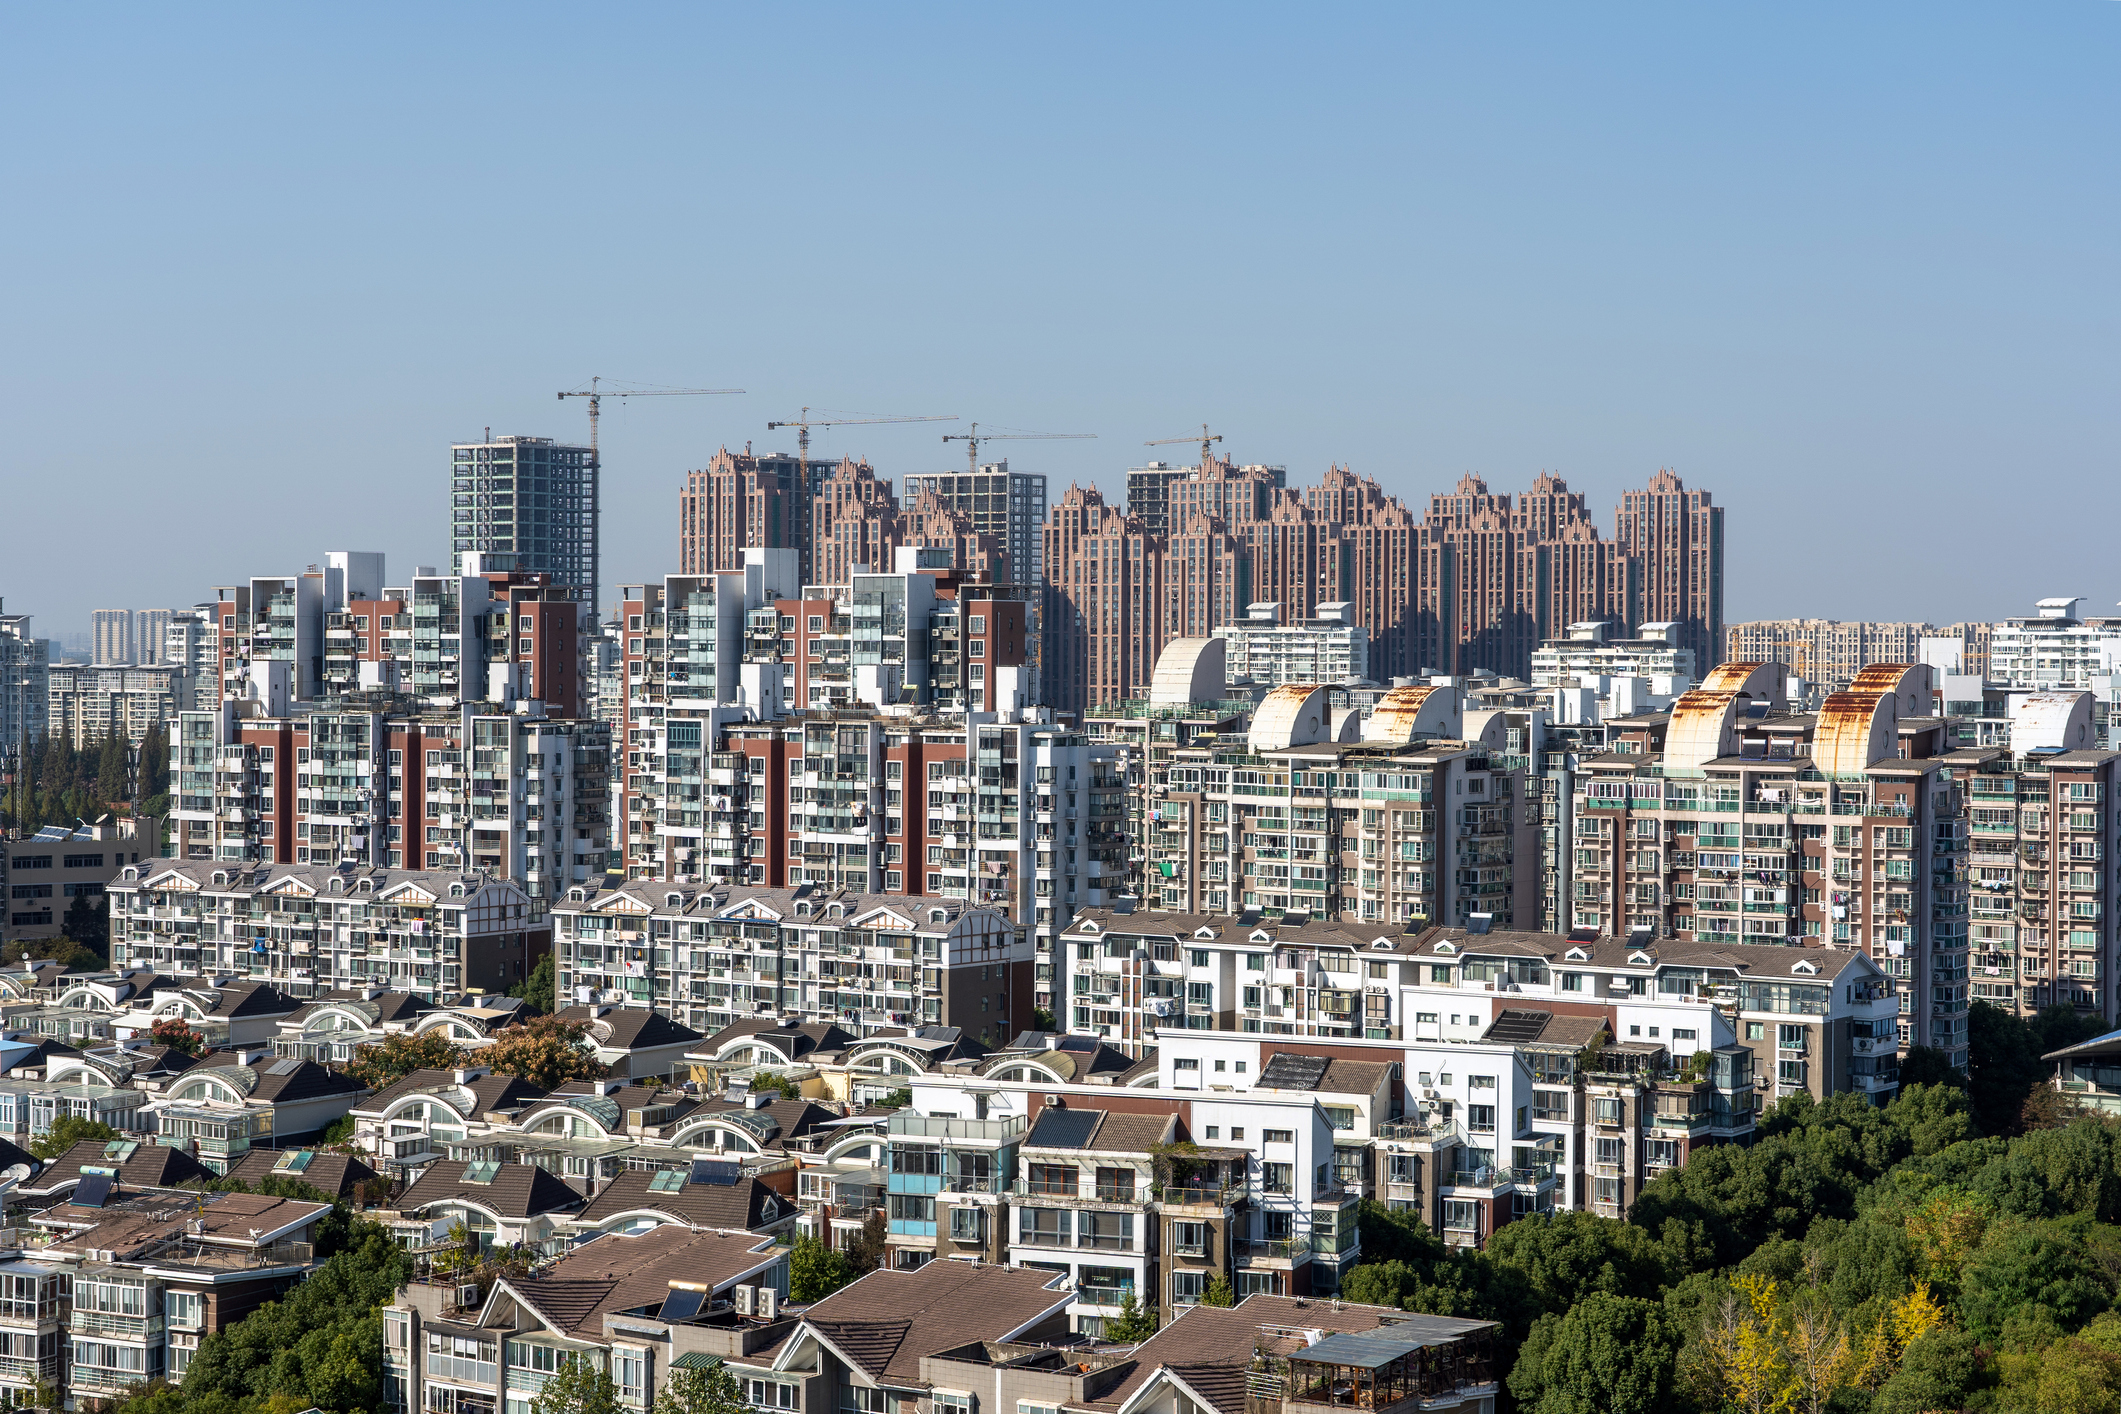 Photo of a city in China with homes and apartments buildings